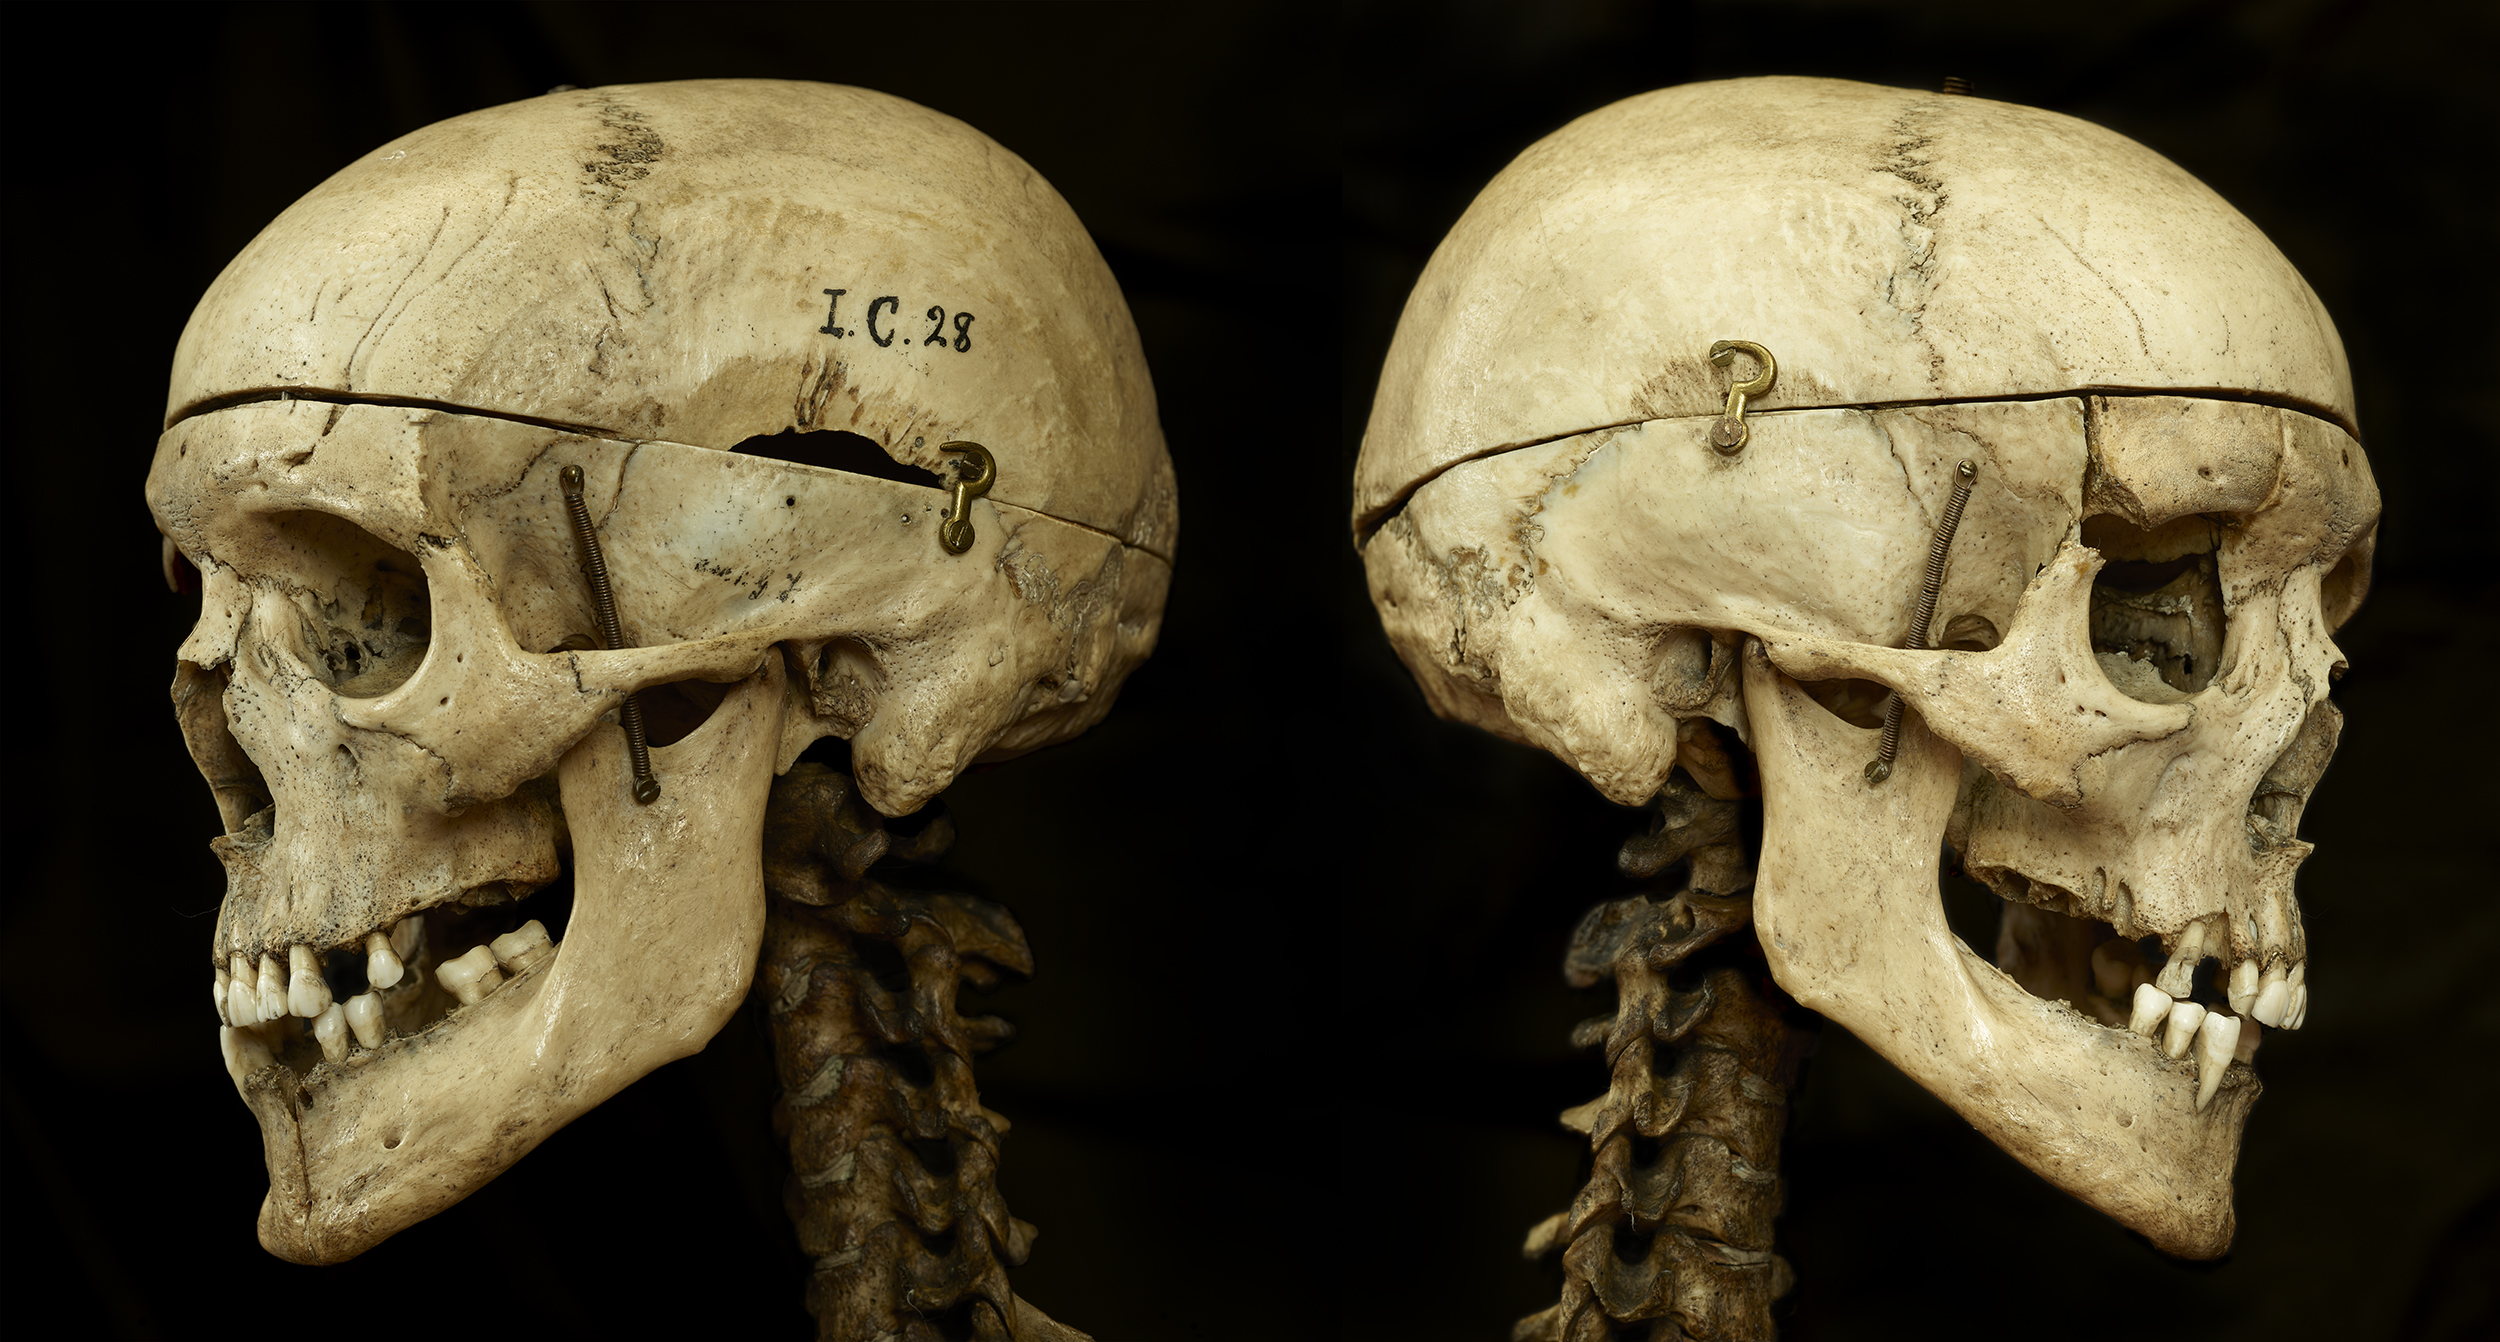 Landscape colour image of two skulls with spine attached on a black background. It is the same skull turned to the left and to the right, facing away from each other back to back.